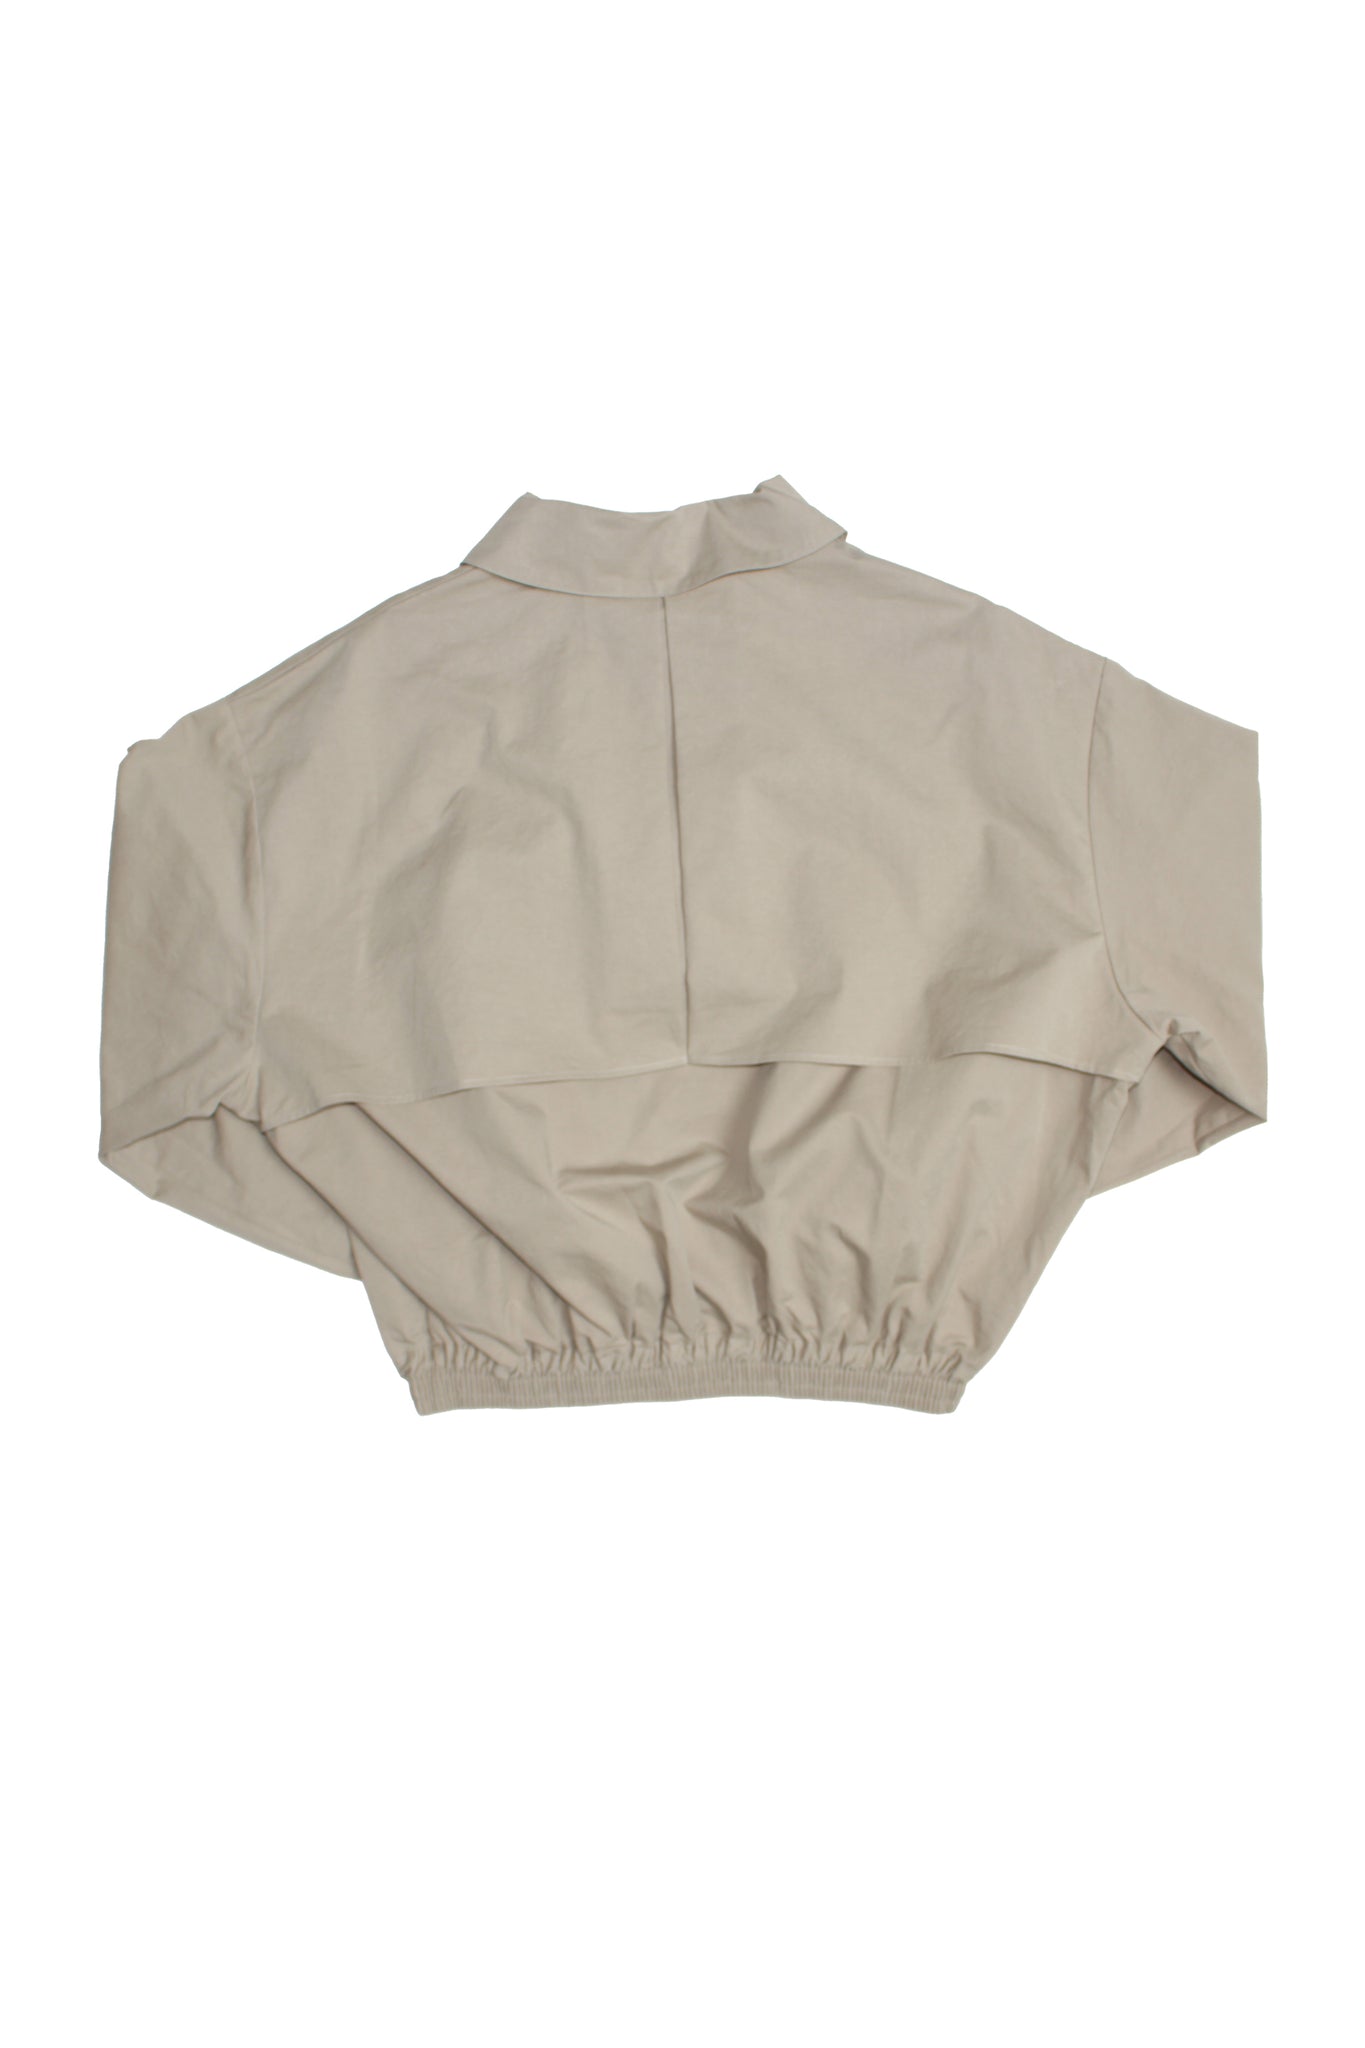 Trench Shirts Jacket in Beige Grey